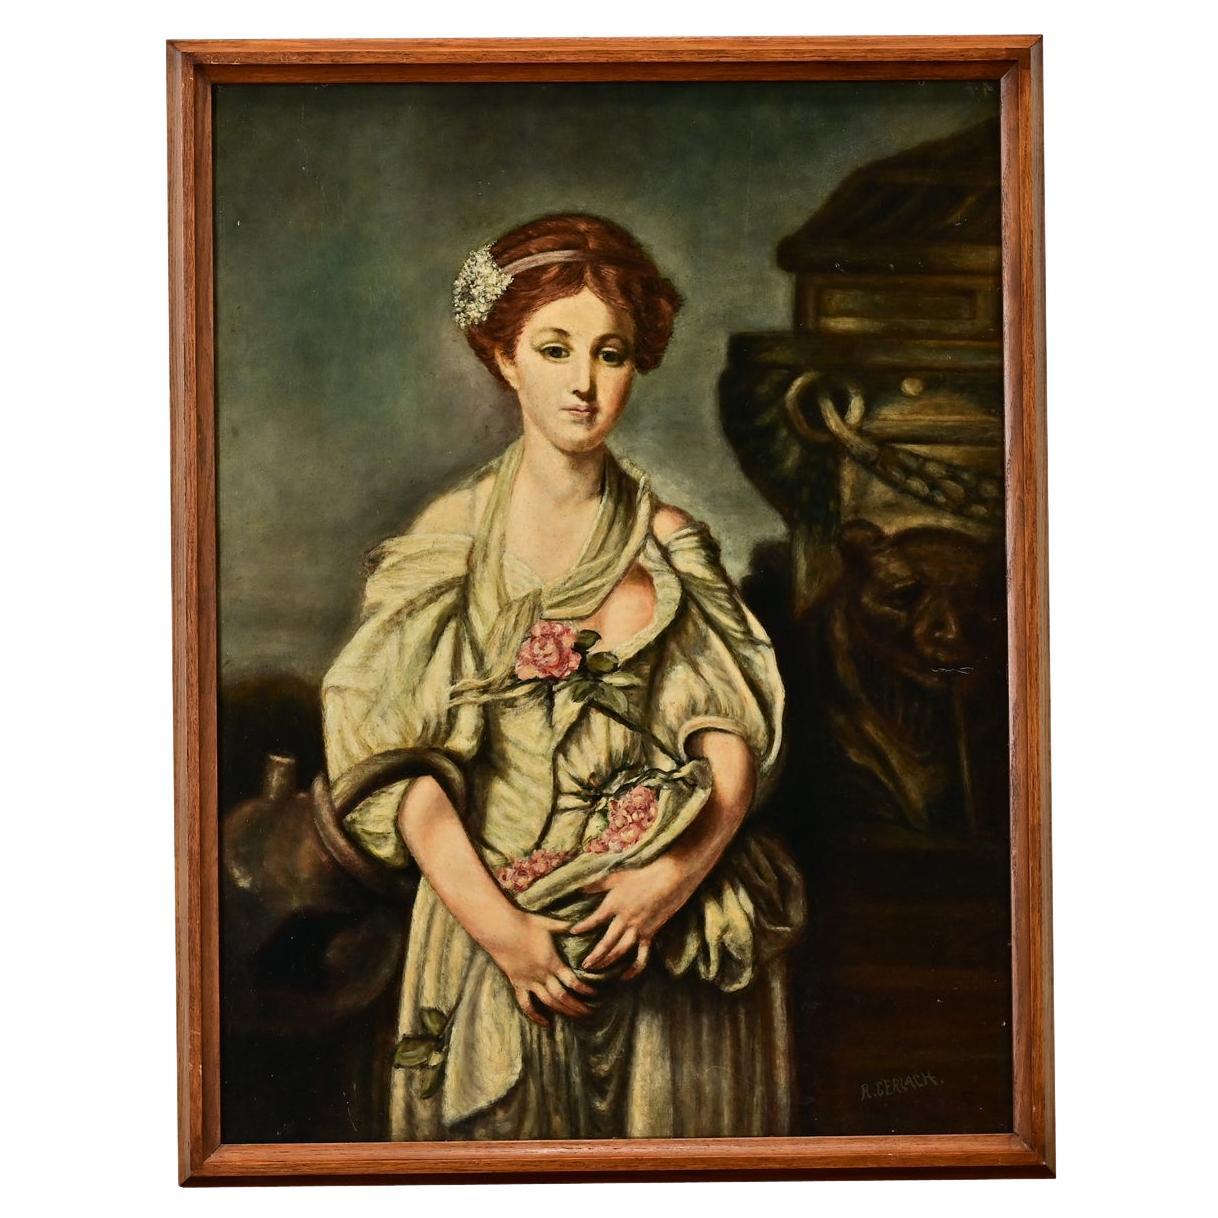 Framed Lady Painting, Signed by Artist